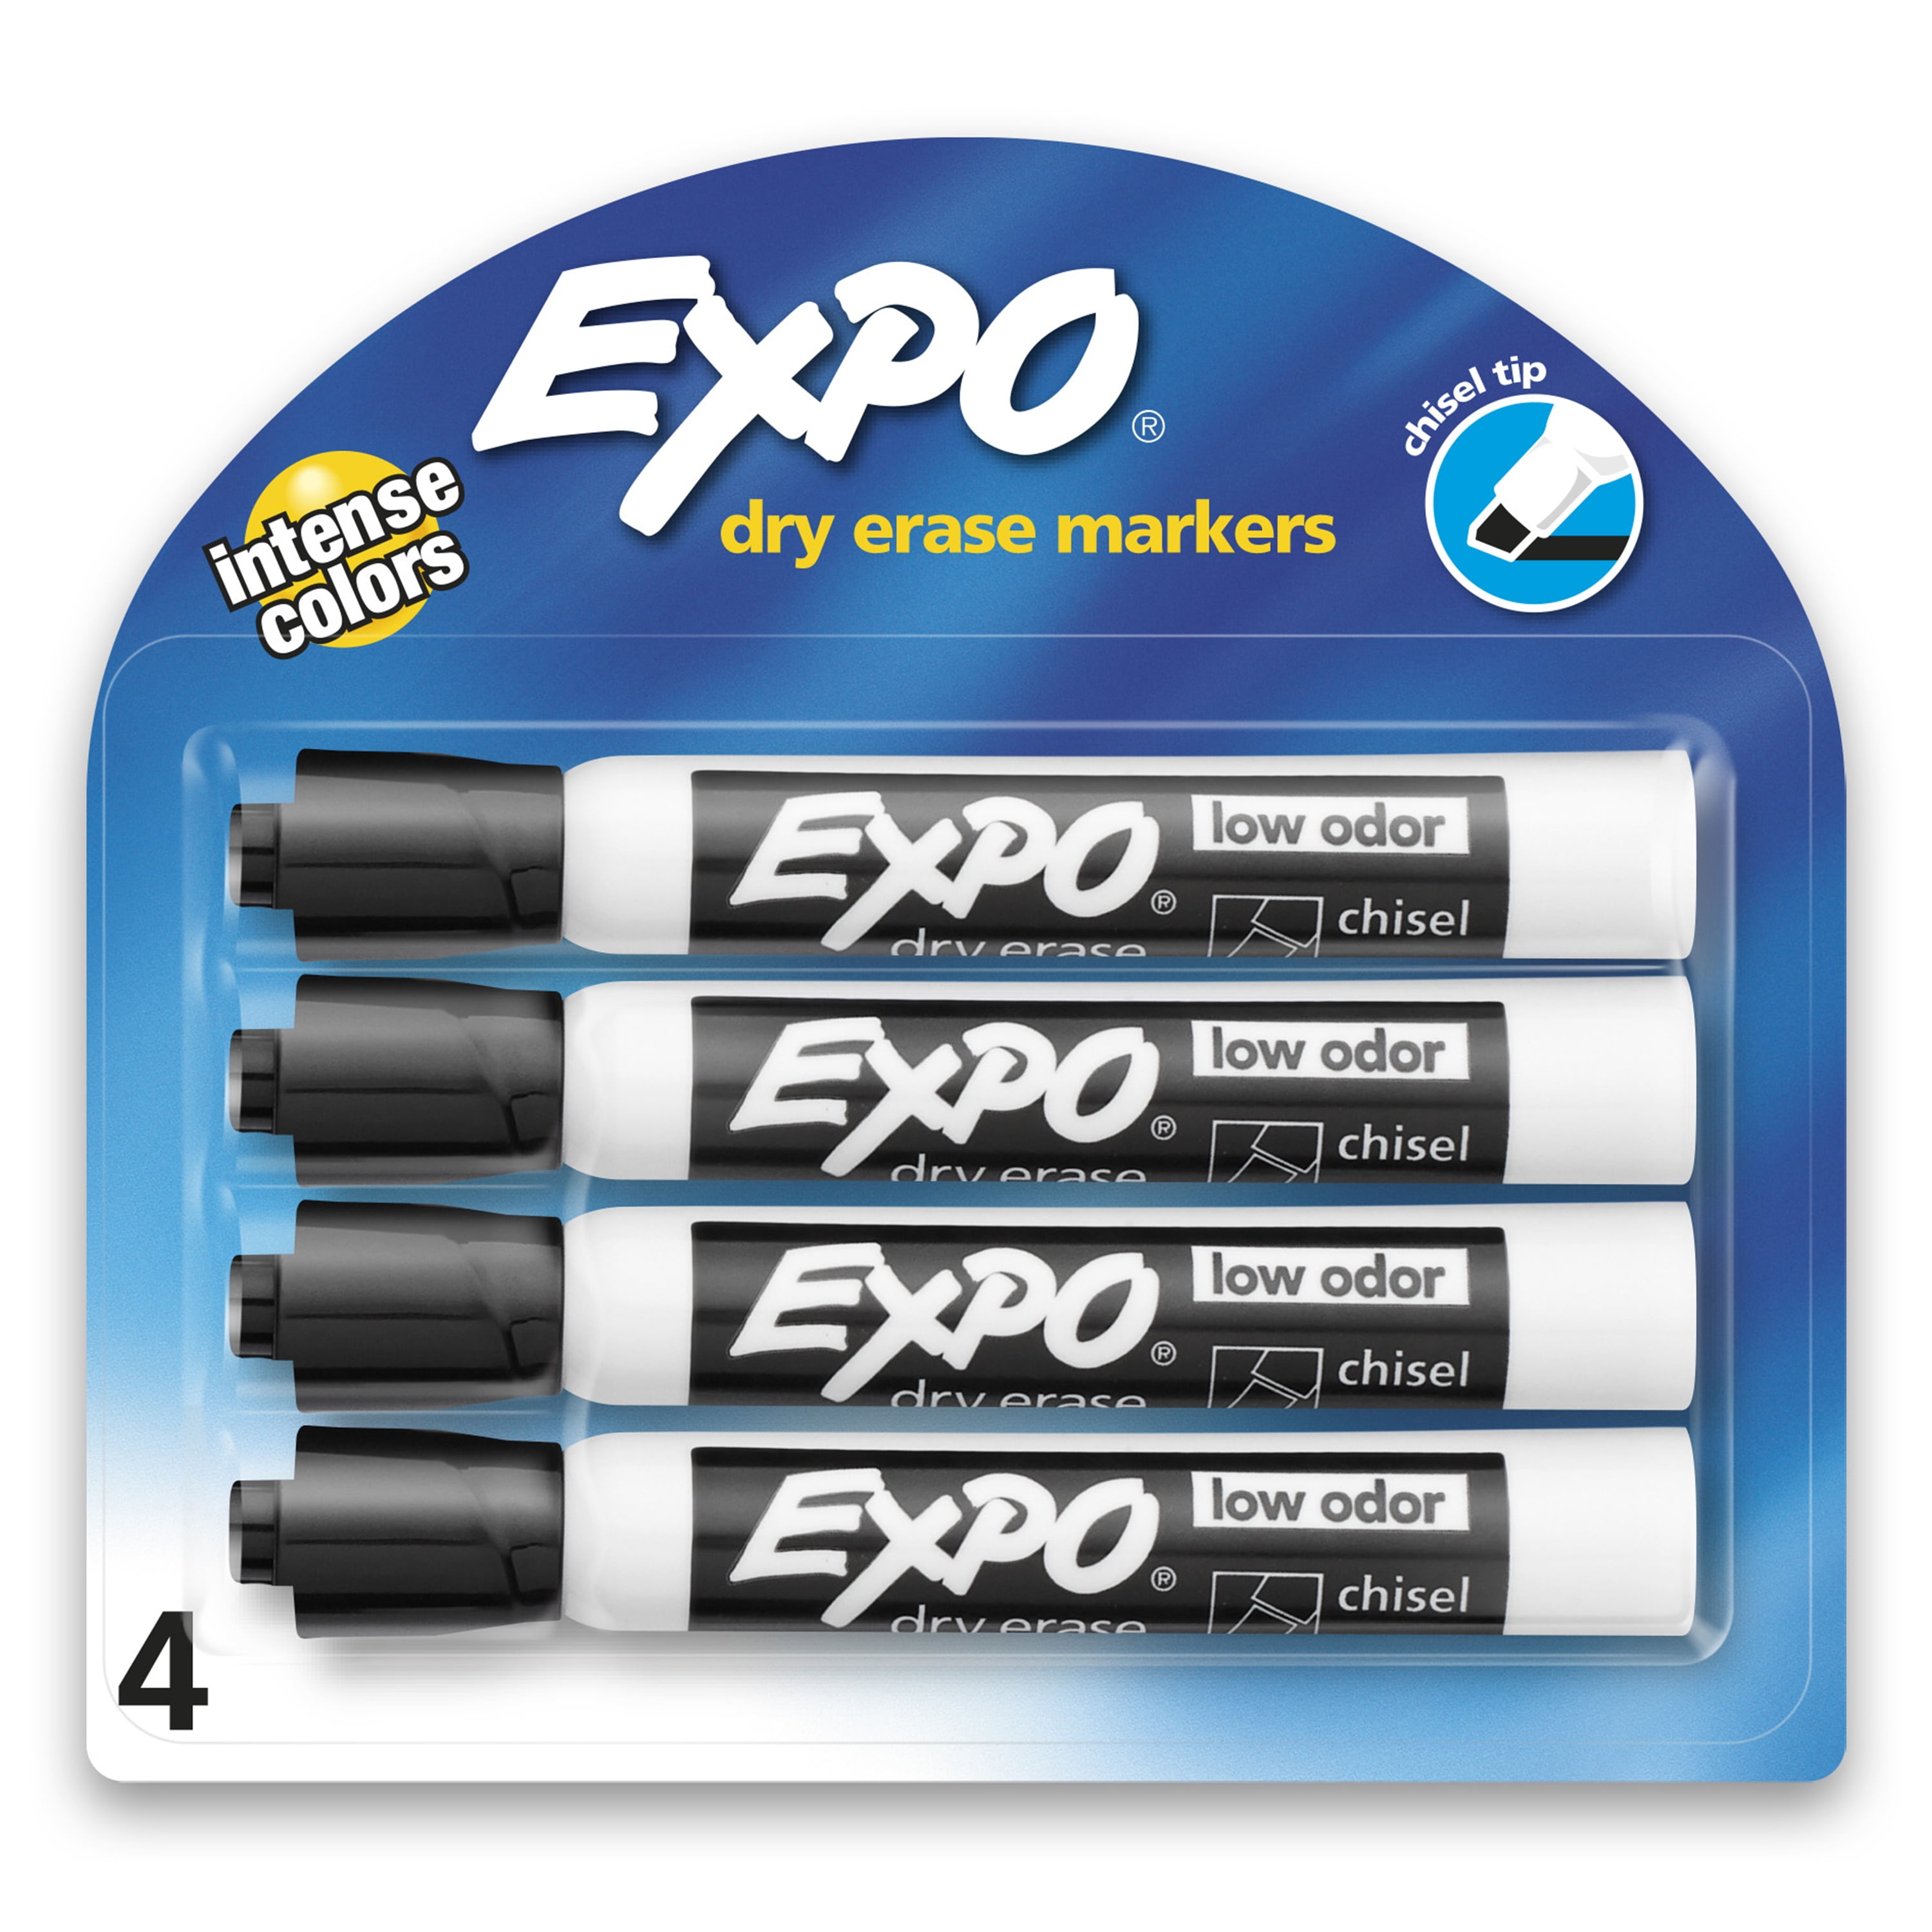 Expo - Dry Erase Markers & Accessories; Color: Black; Color: Black; Tip  Type: Ultra Fine; For Use With: Dry Erase Marker Boards; Includes: (36)  Black Dry Erase Markers - 95570719 - MSC Industrial Supply